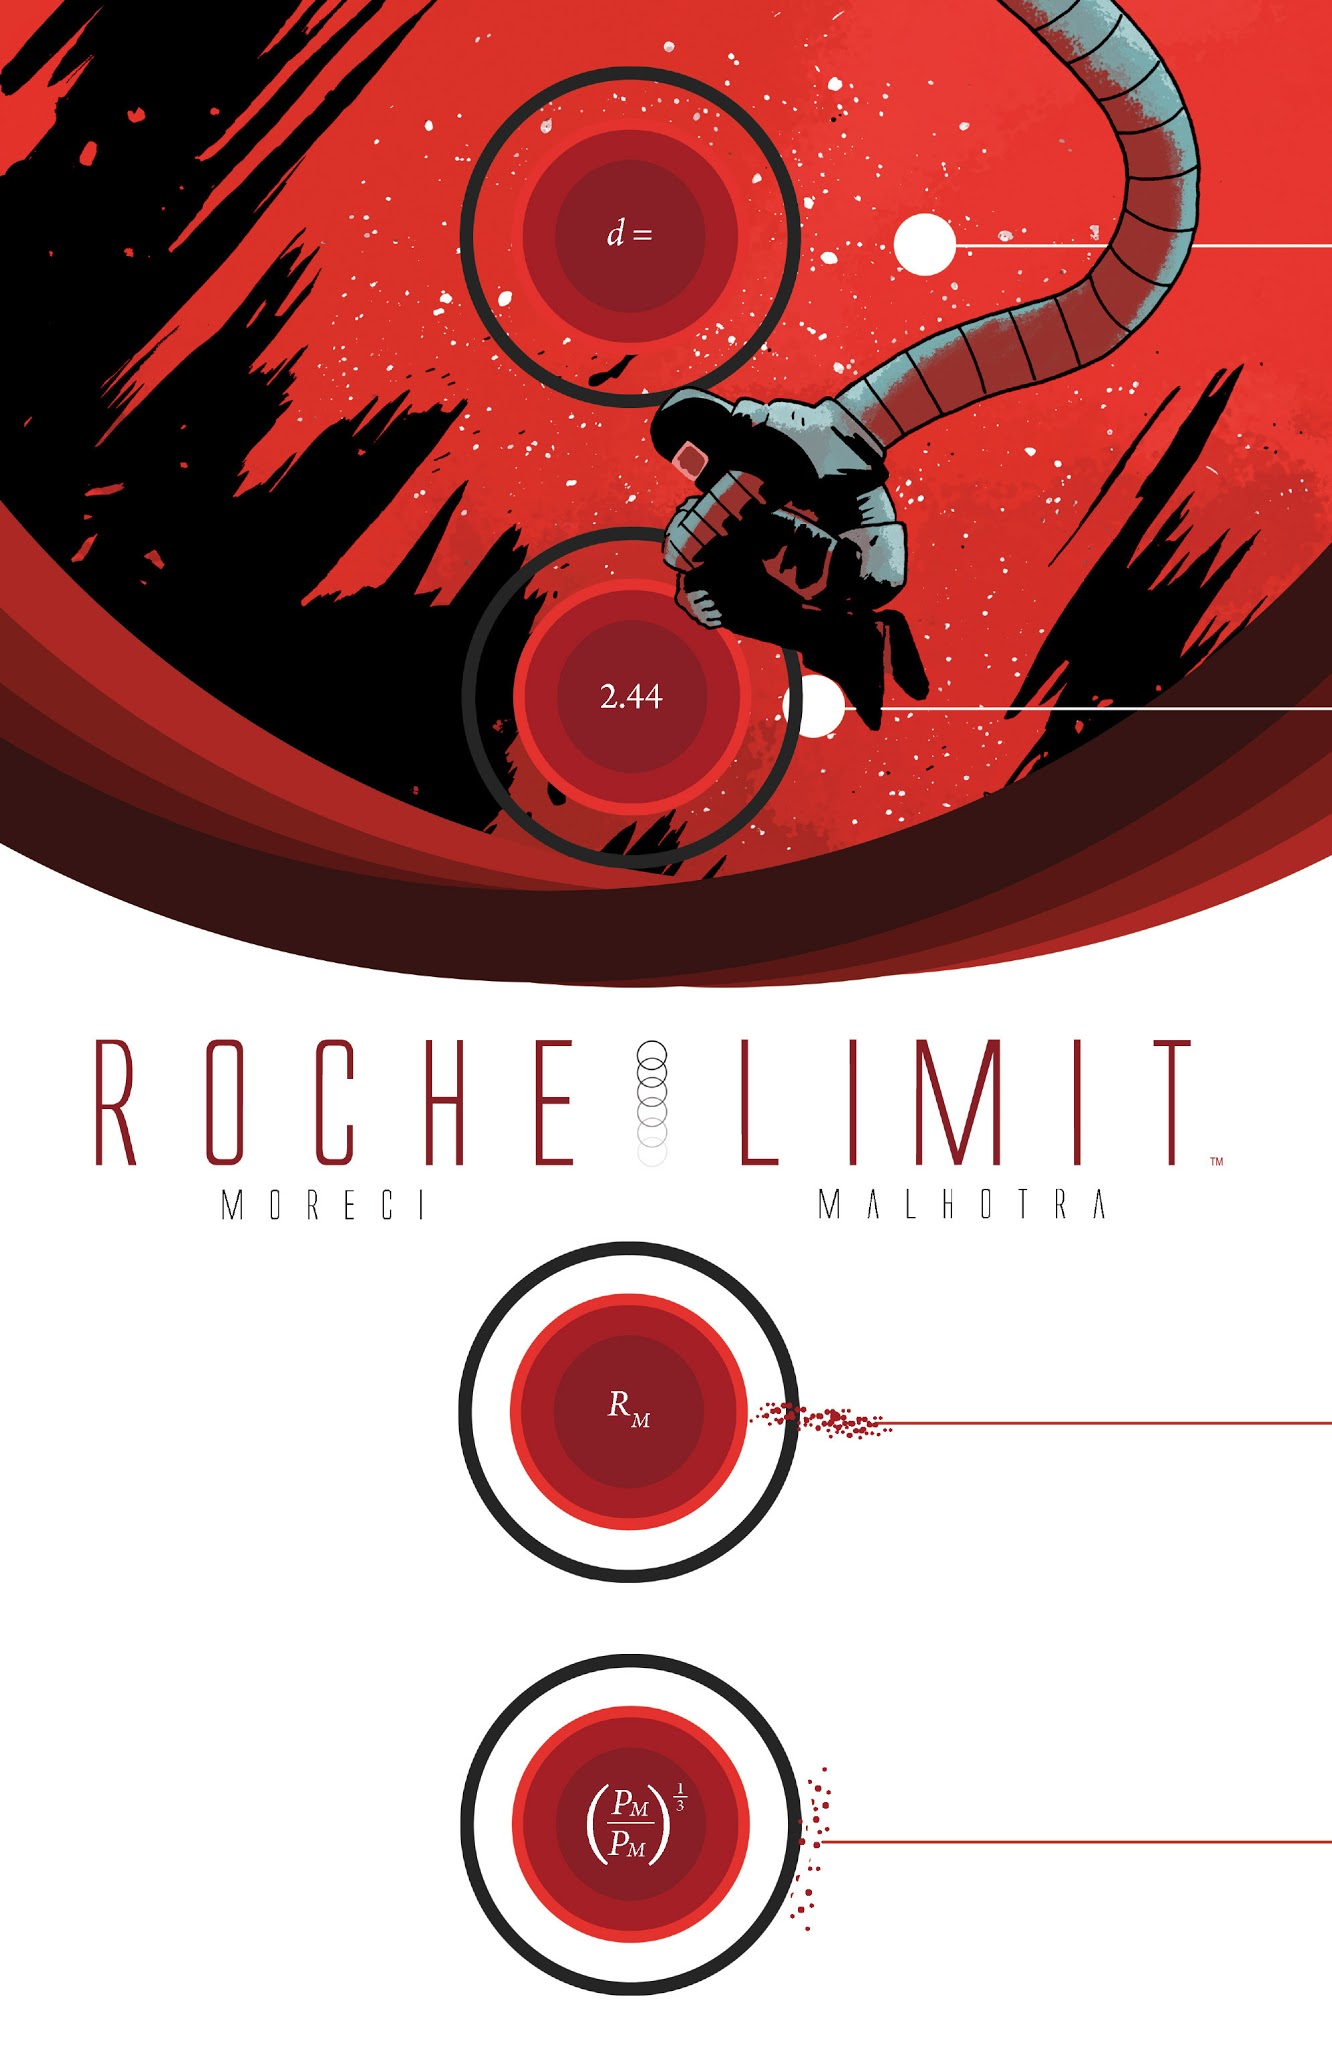 Read online Roche Limit comic -  Issue # TPB - 1